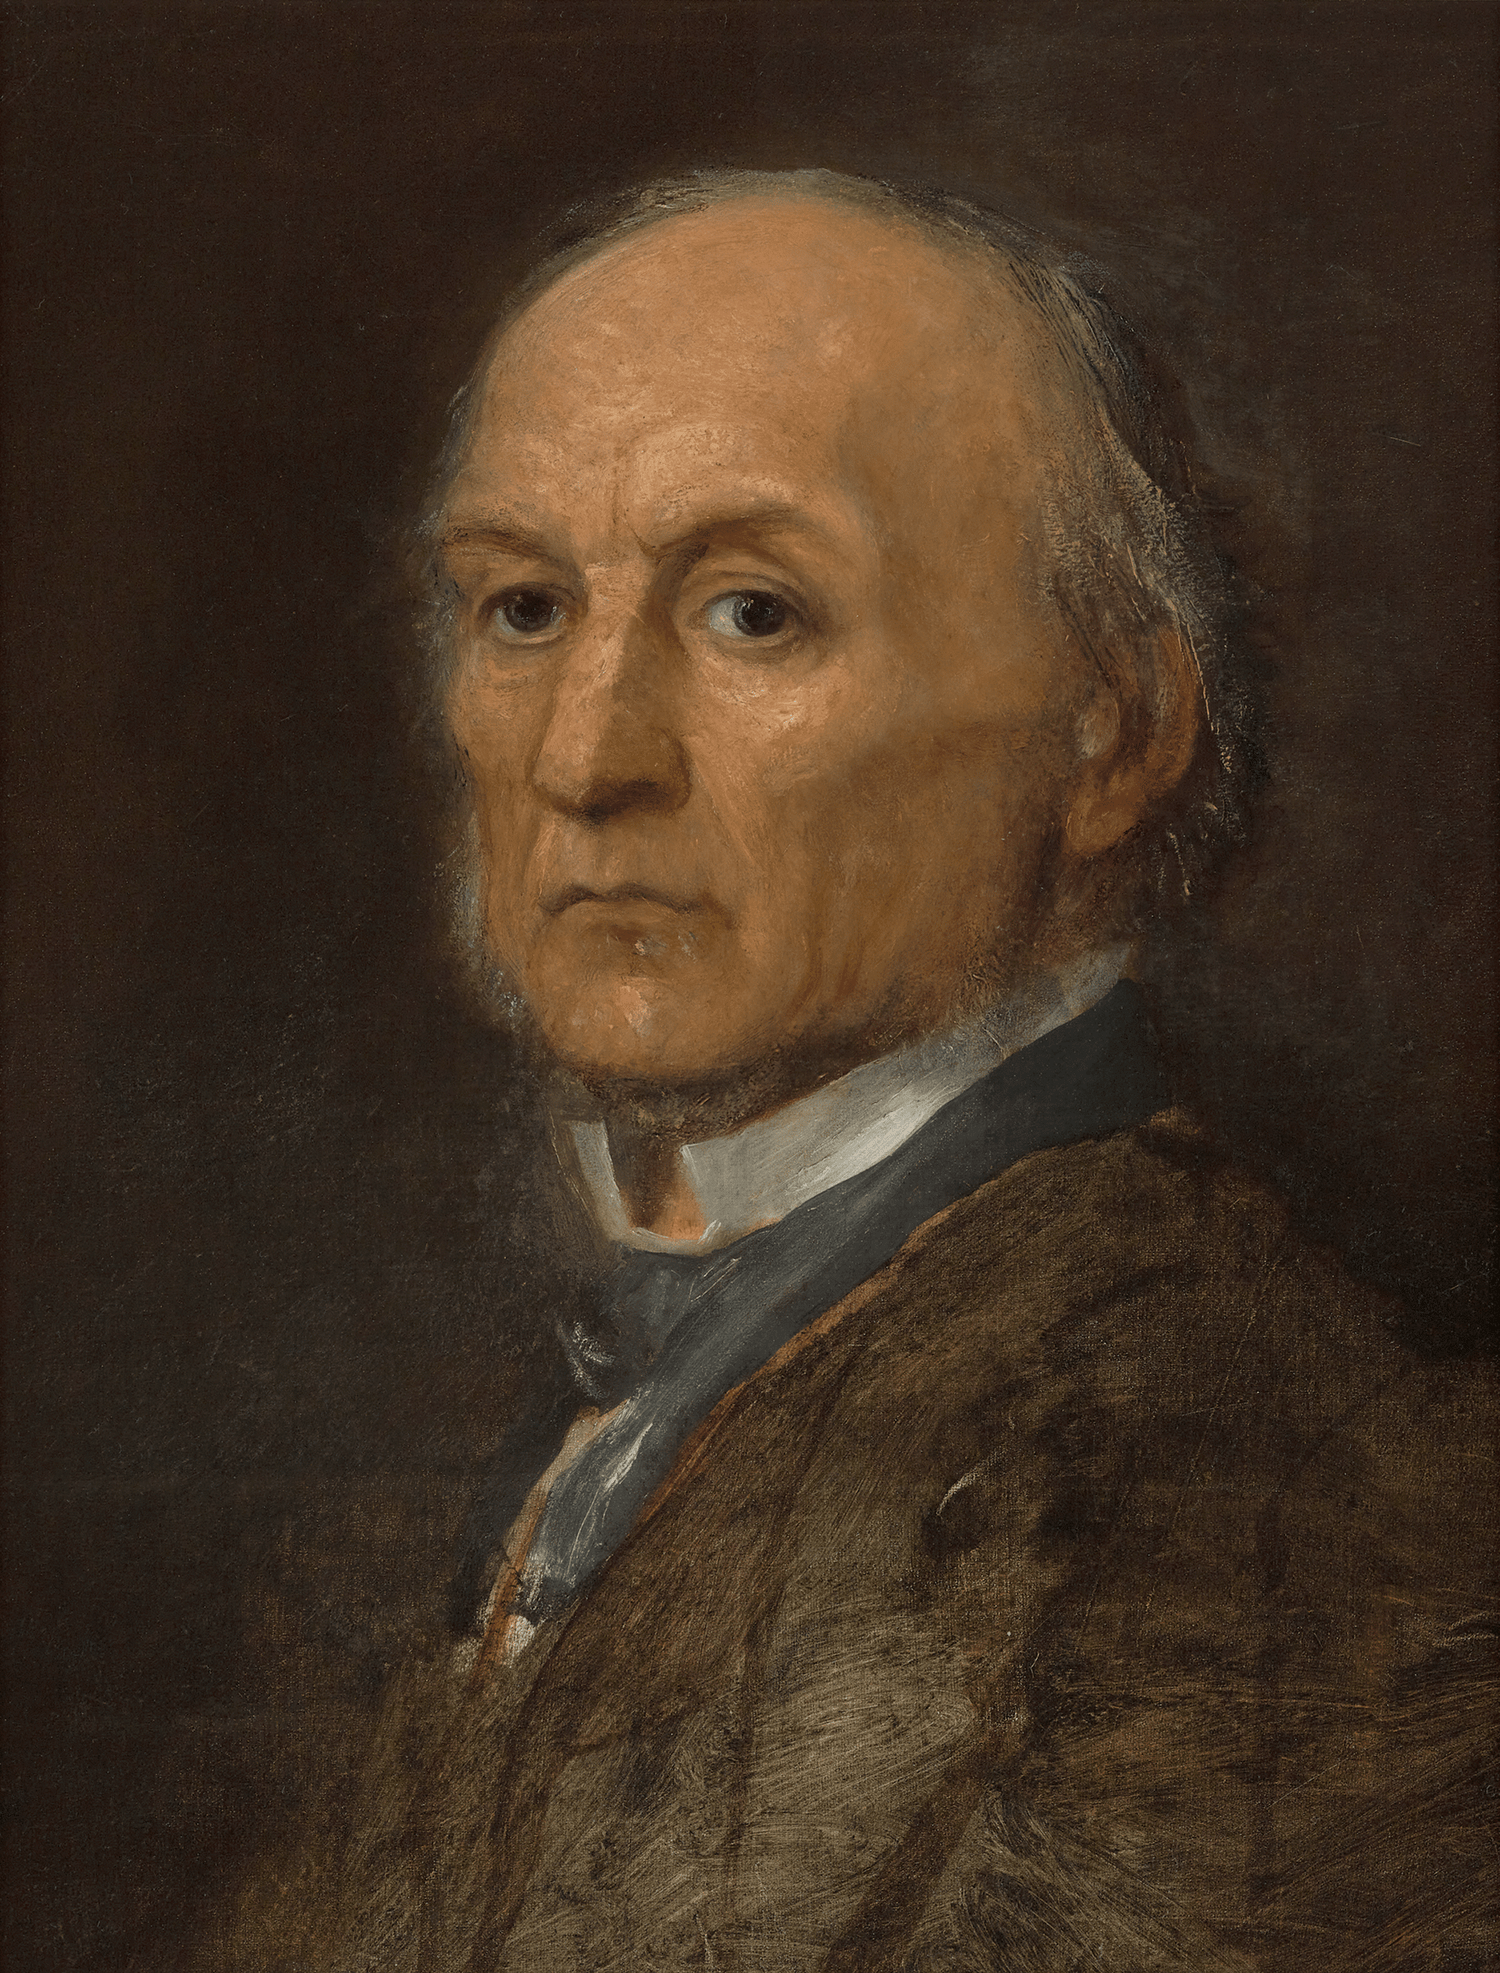 Portrait of Prime Minister William Ewart Gladstone by George Frederic Watts